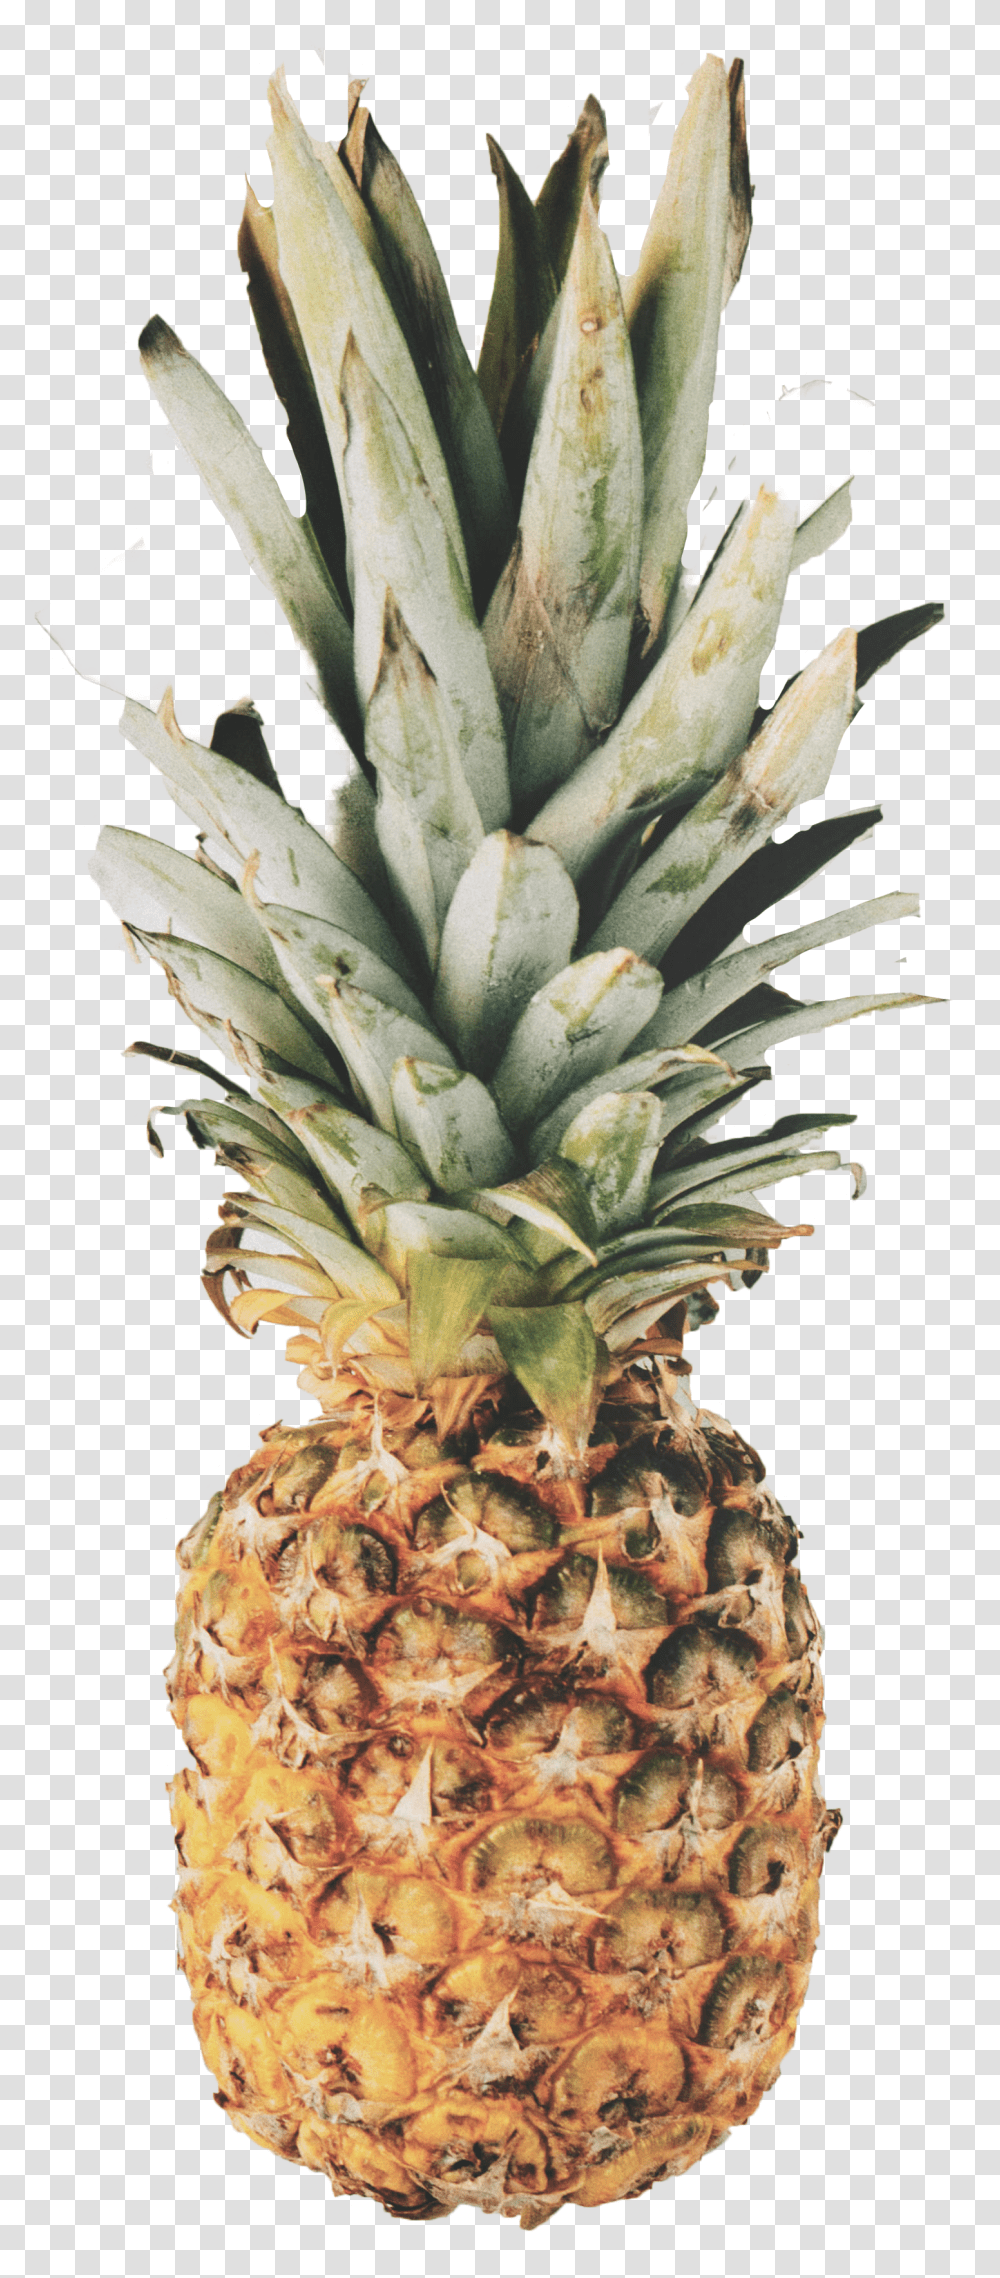 Pineapple Image Pineapple Marble Transparent Png